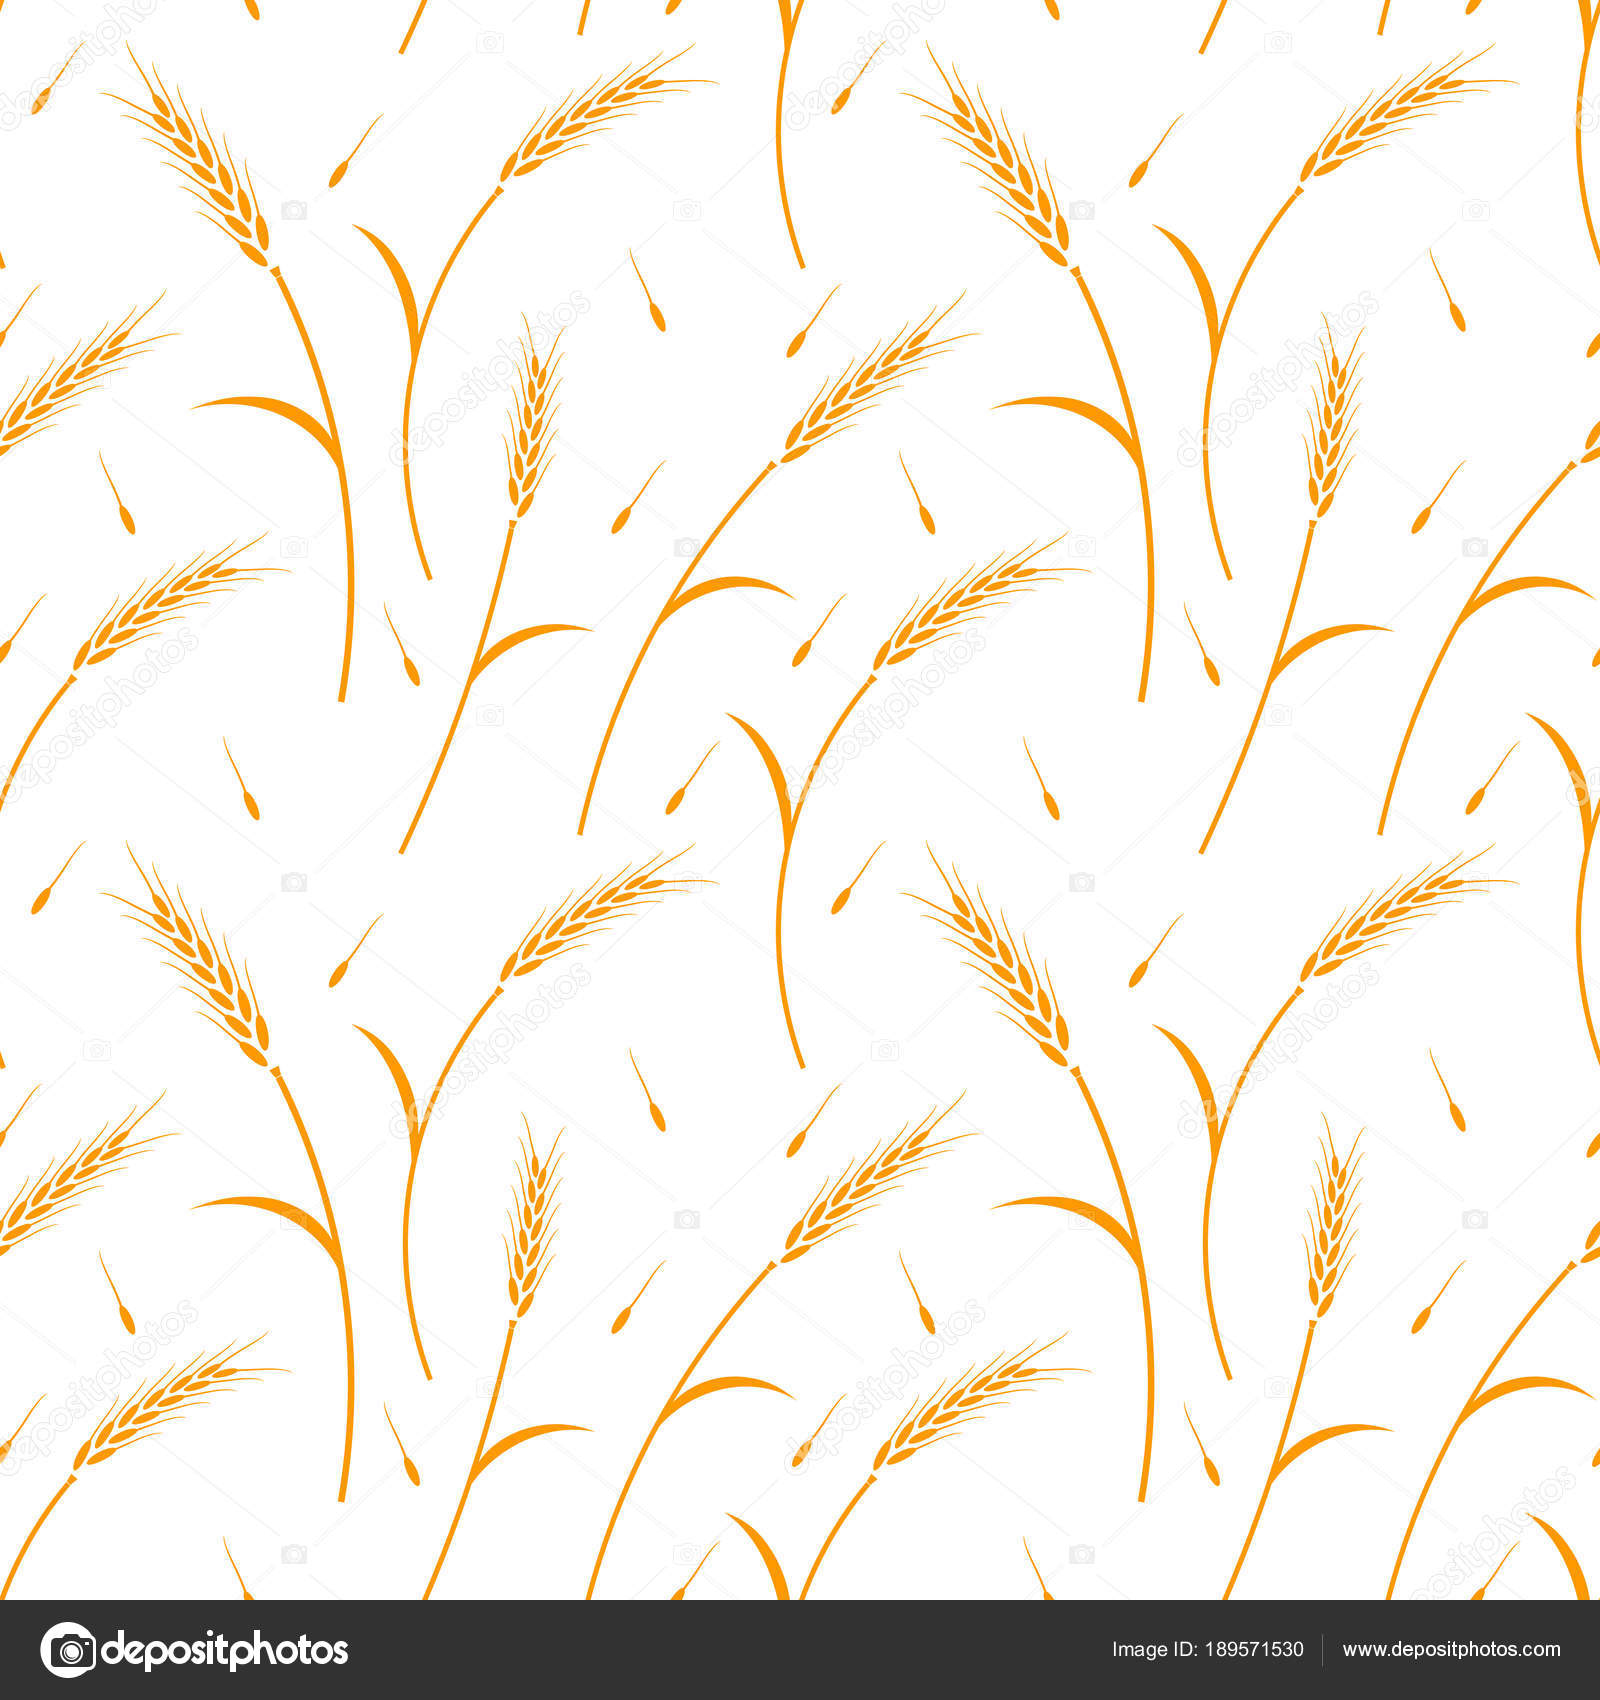 Whole grain, natural, organic background for bakery package, bread ...